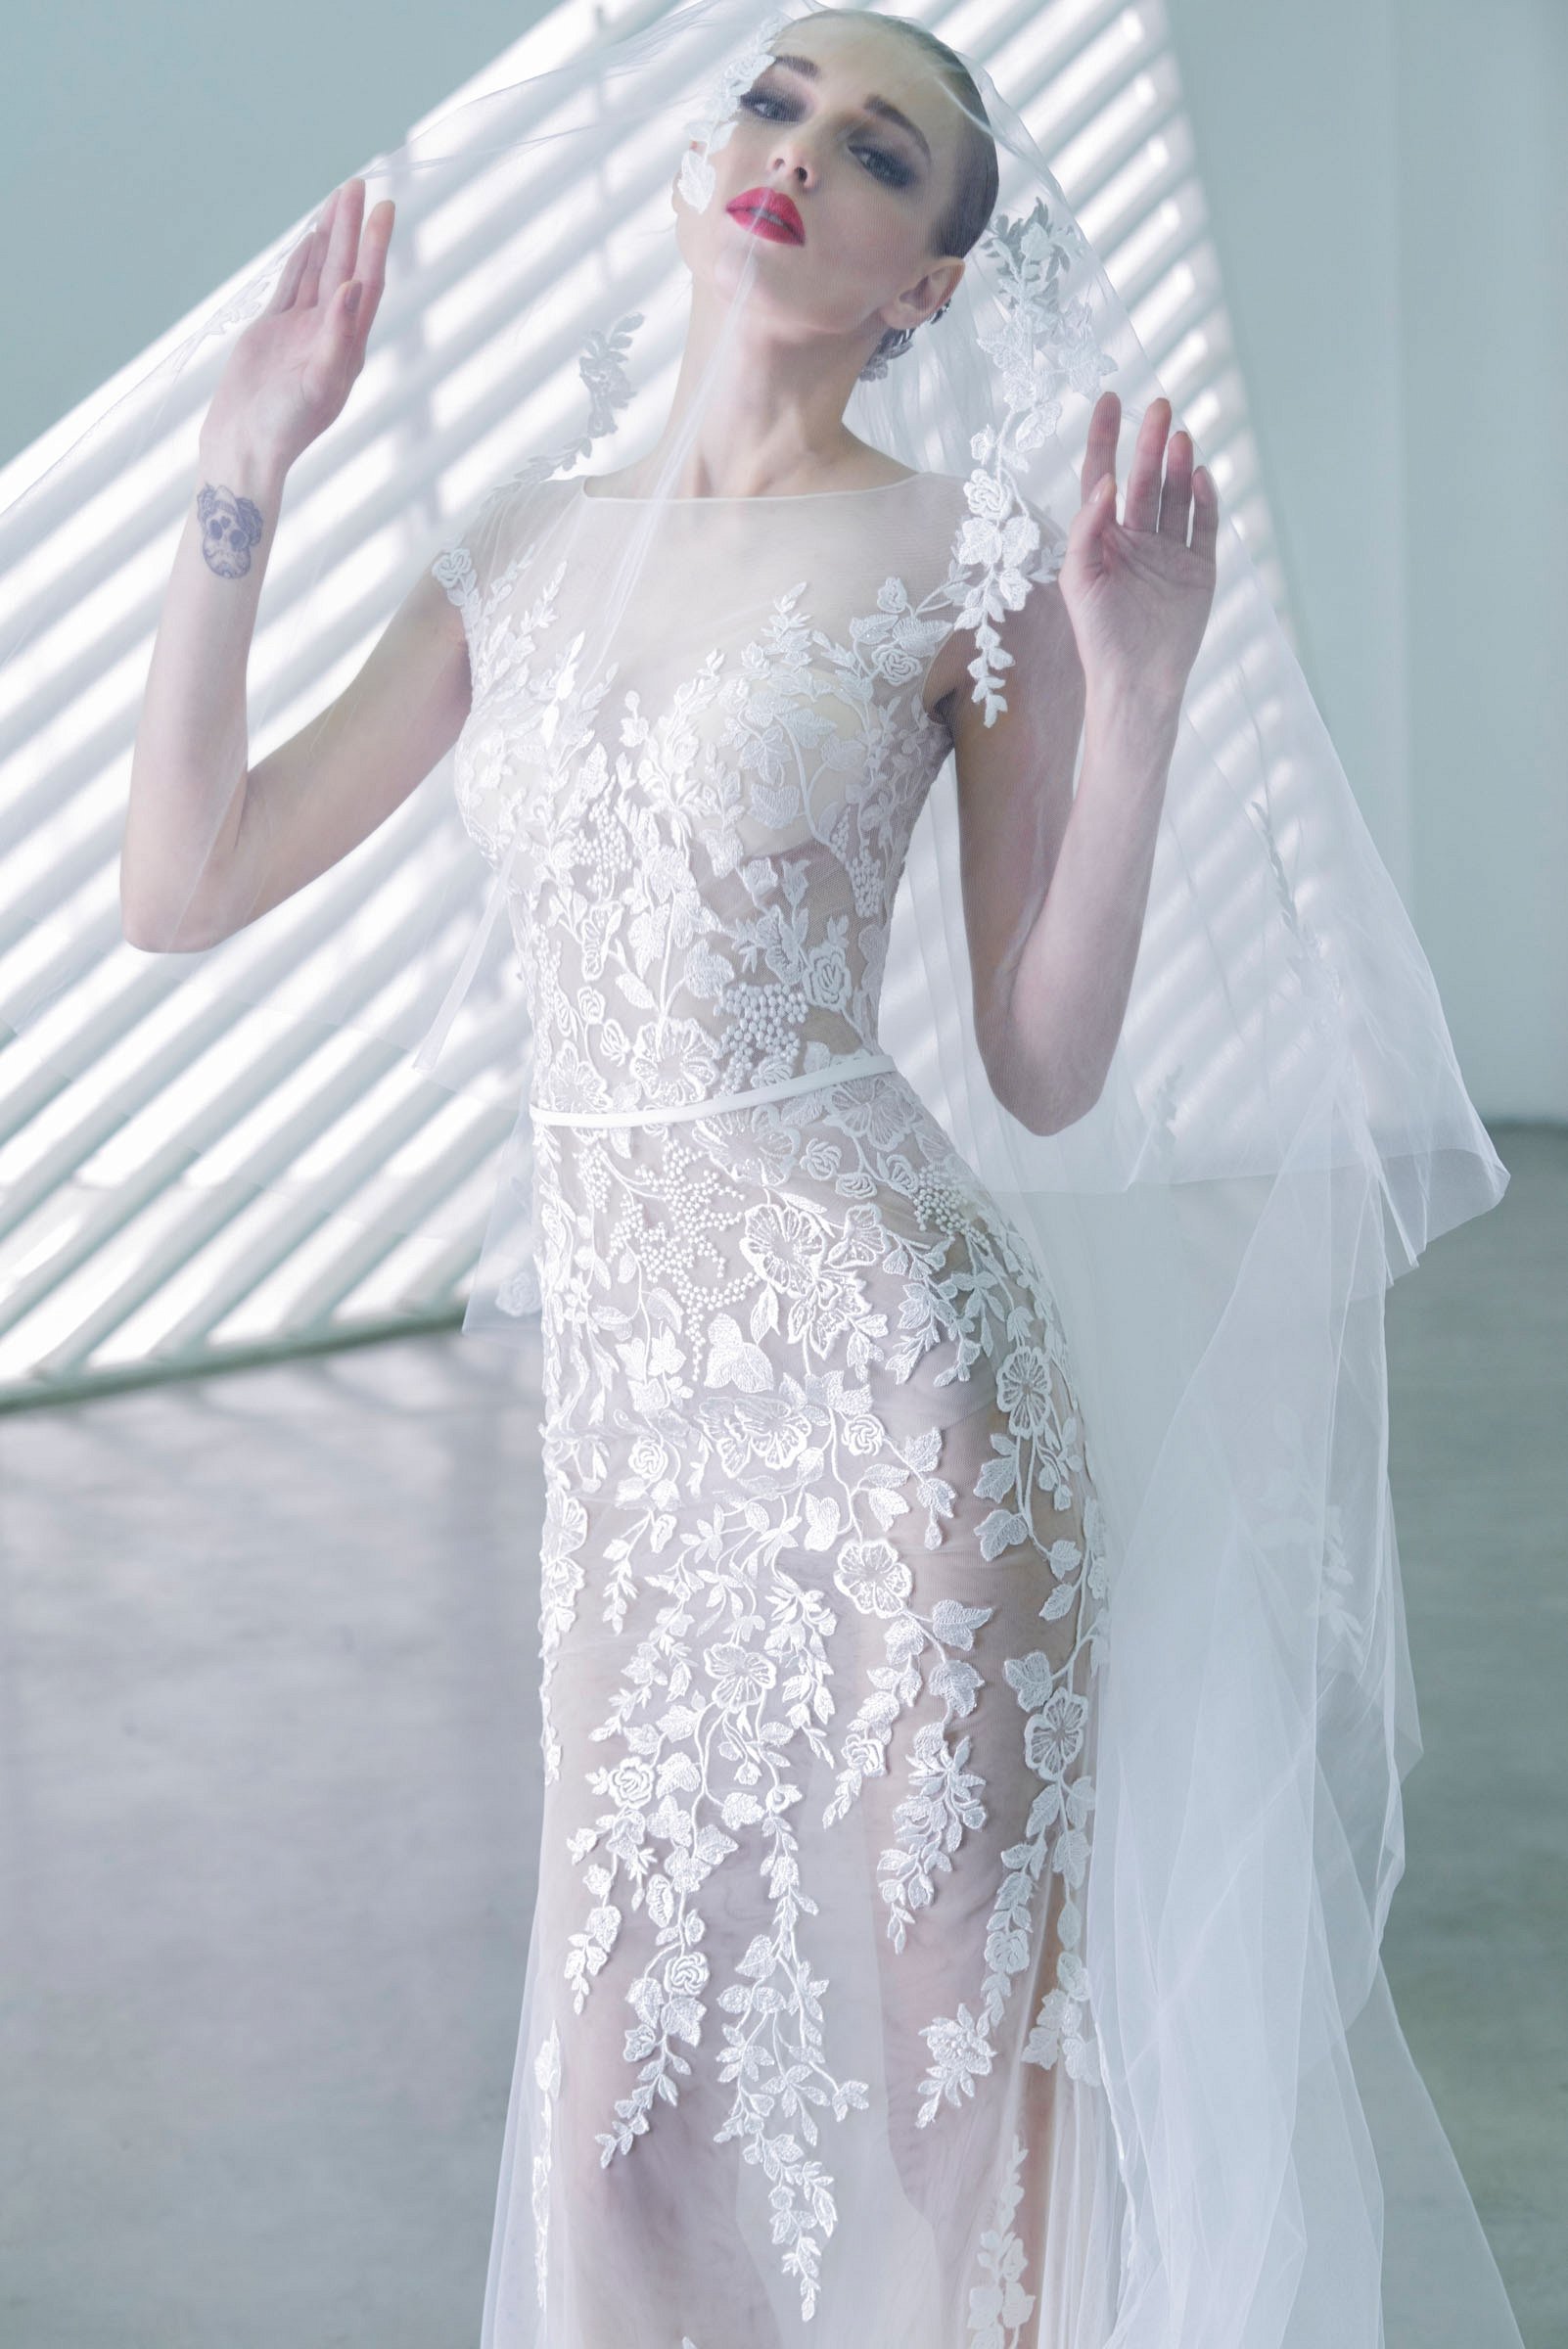 Dany Tabet 2018 collection - Bridal